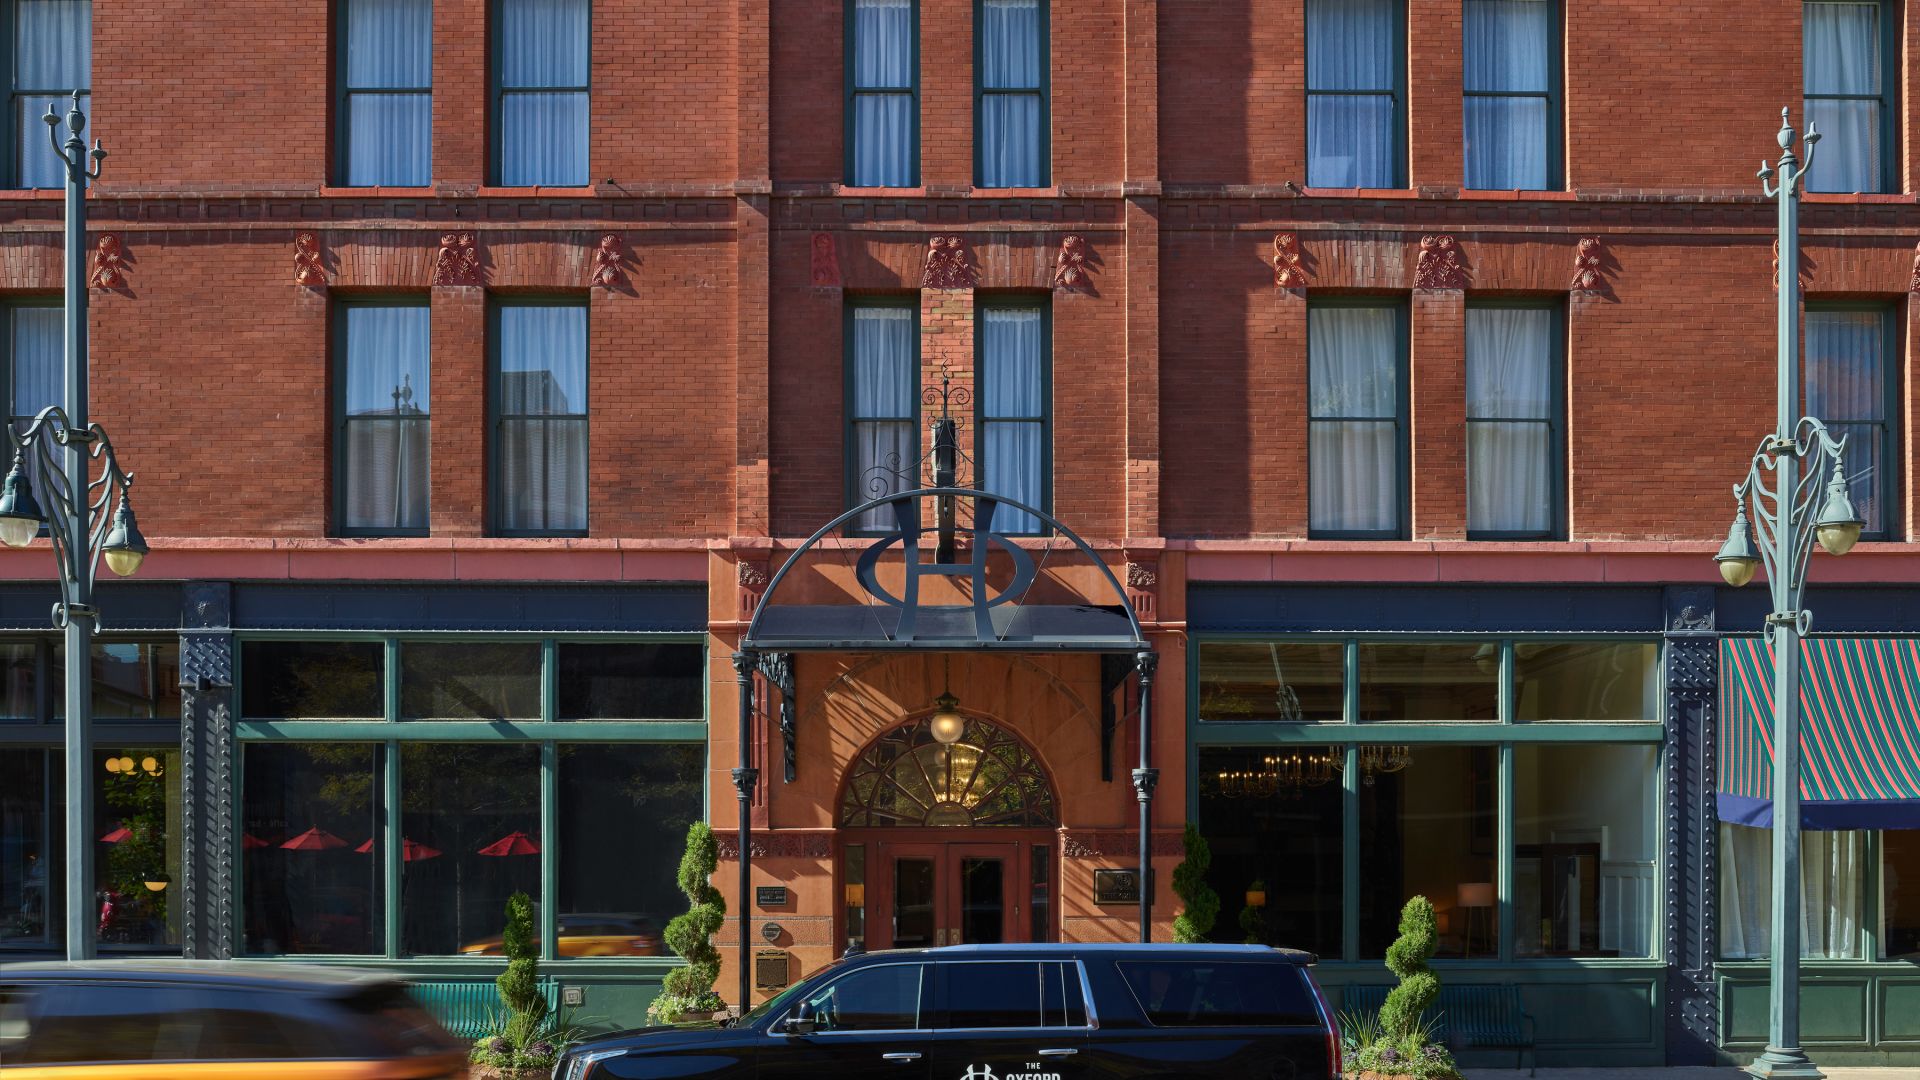 The Oxford Facade - The Oxford branded Cadillac Escalade in front of the historic Red Brick Building